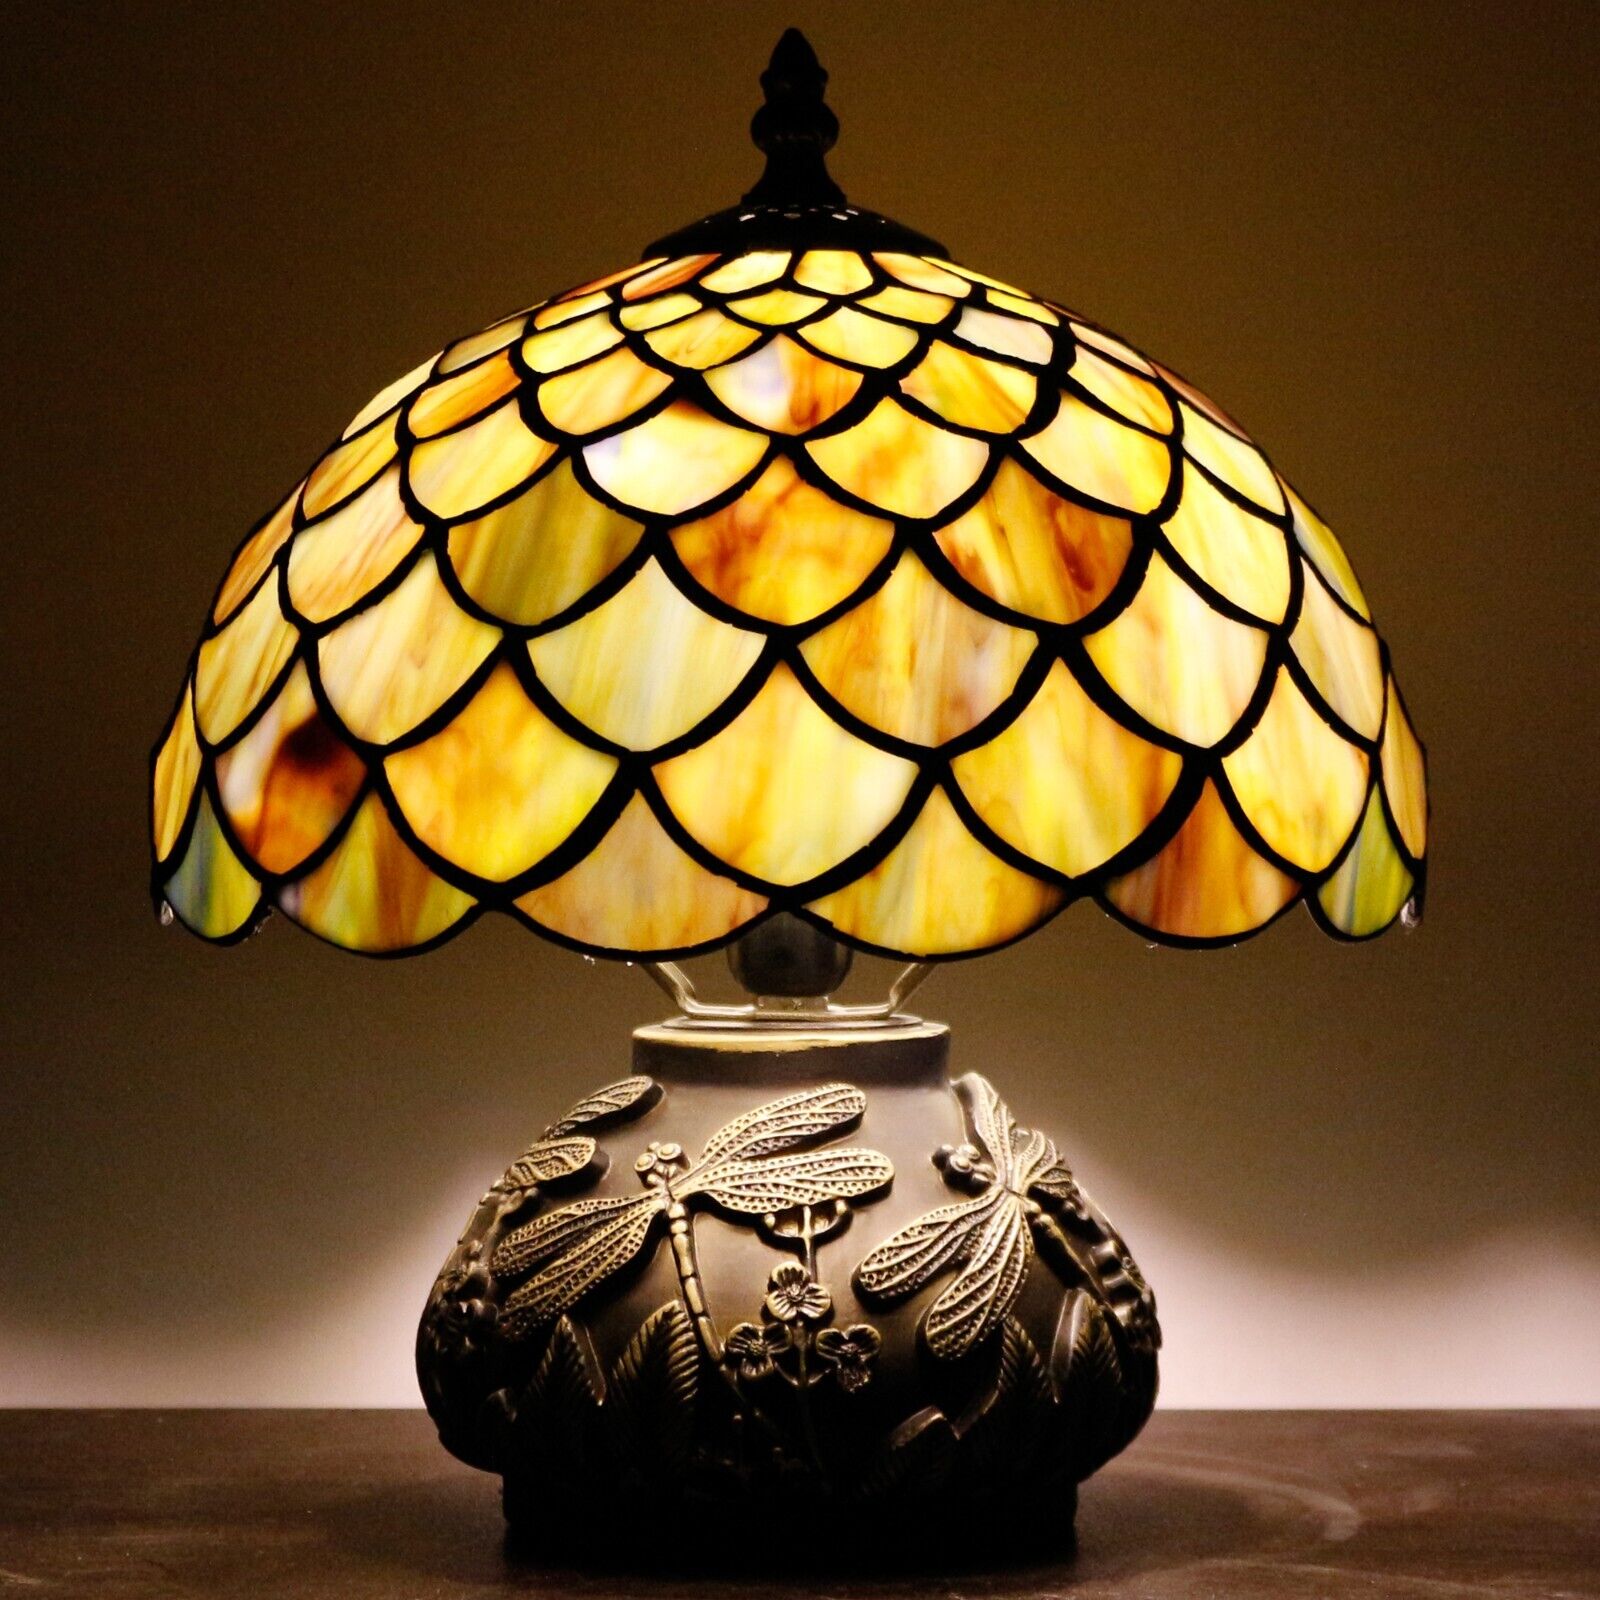 Small Tiffany Table Lamp Yellow Fish Scales Mini Stained Glass Desk Lamp 10 INCH